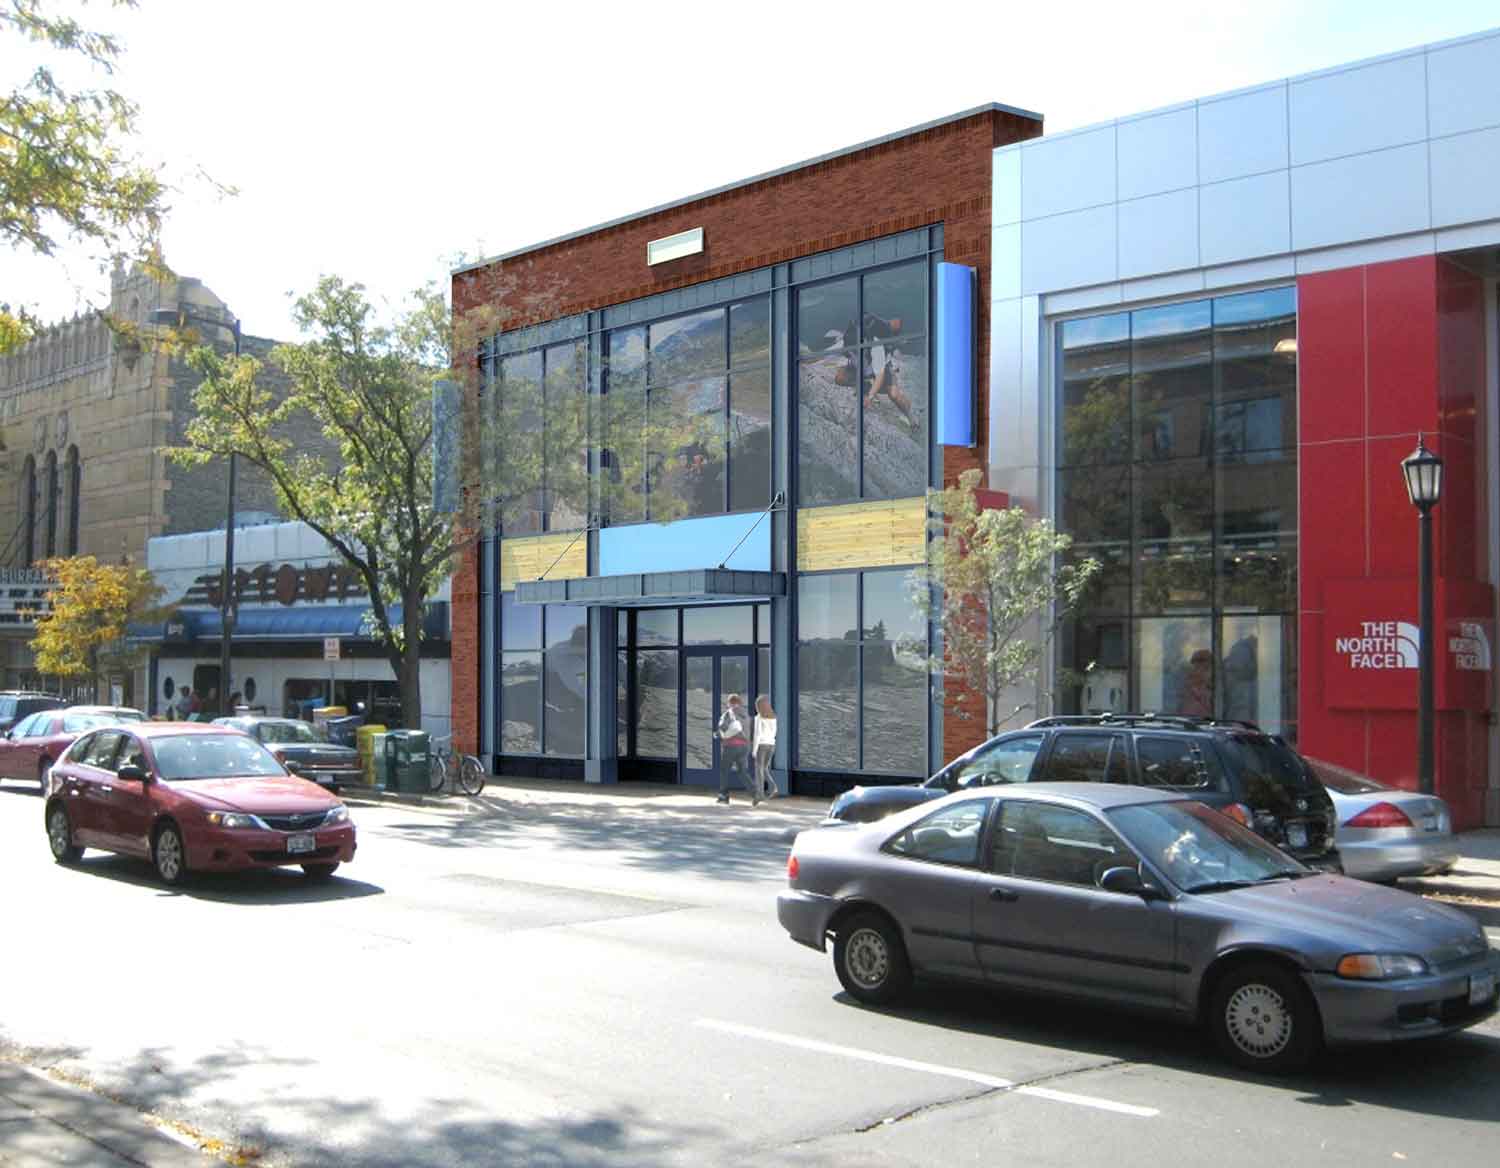 Outside of new building designed in Uptown Minneapolis, Minnesota. Retail shell designed by Framework Architects